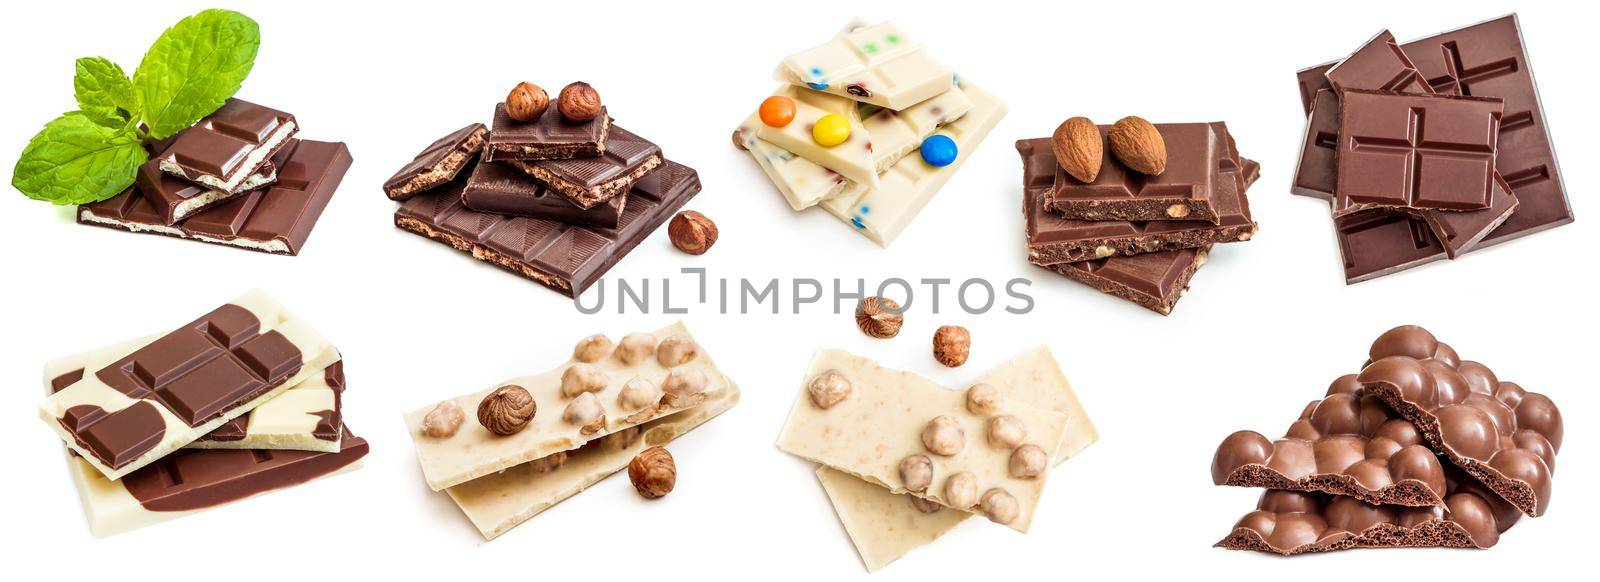 Photo collage of chocolate bars isolated on a white background